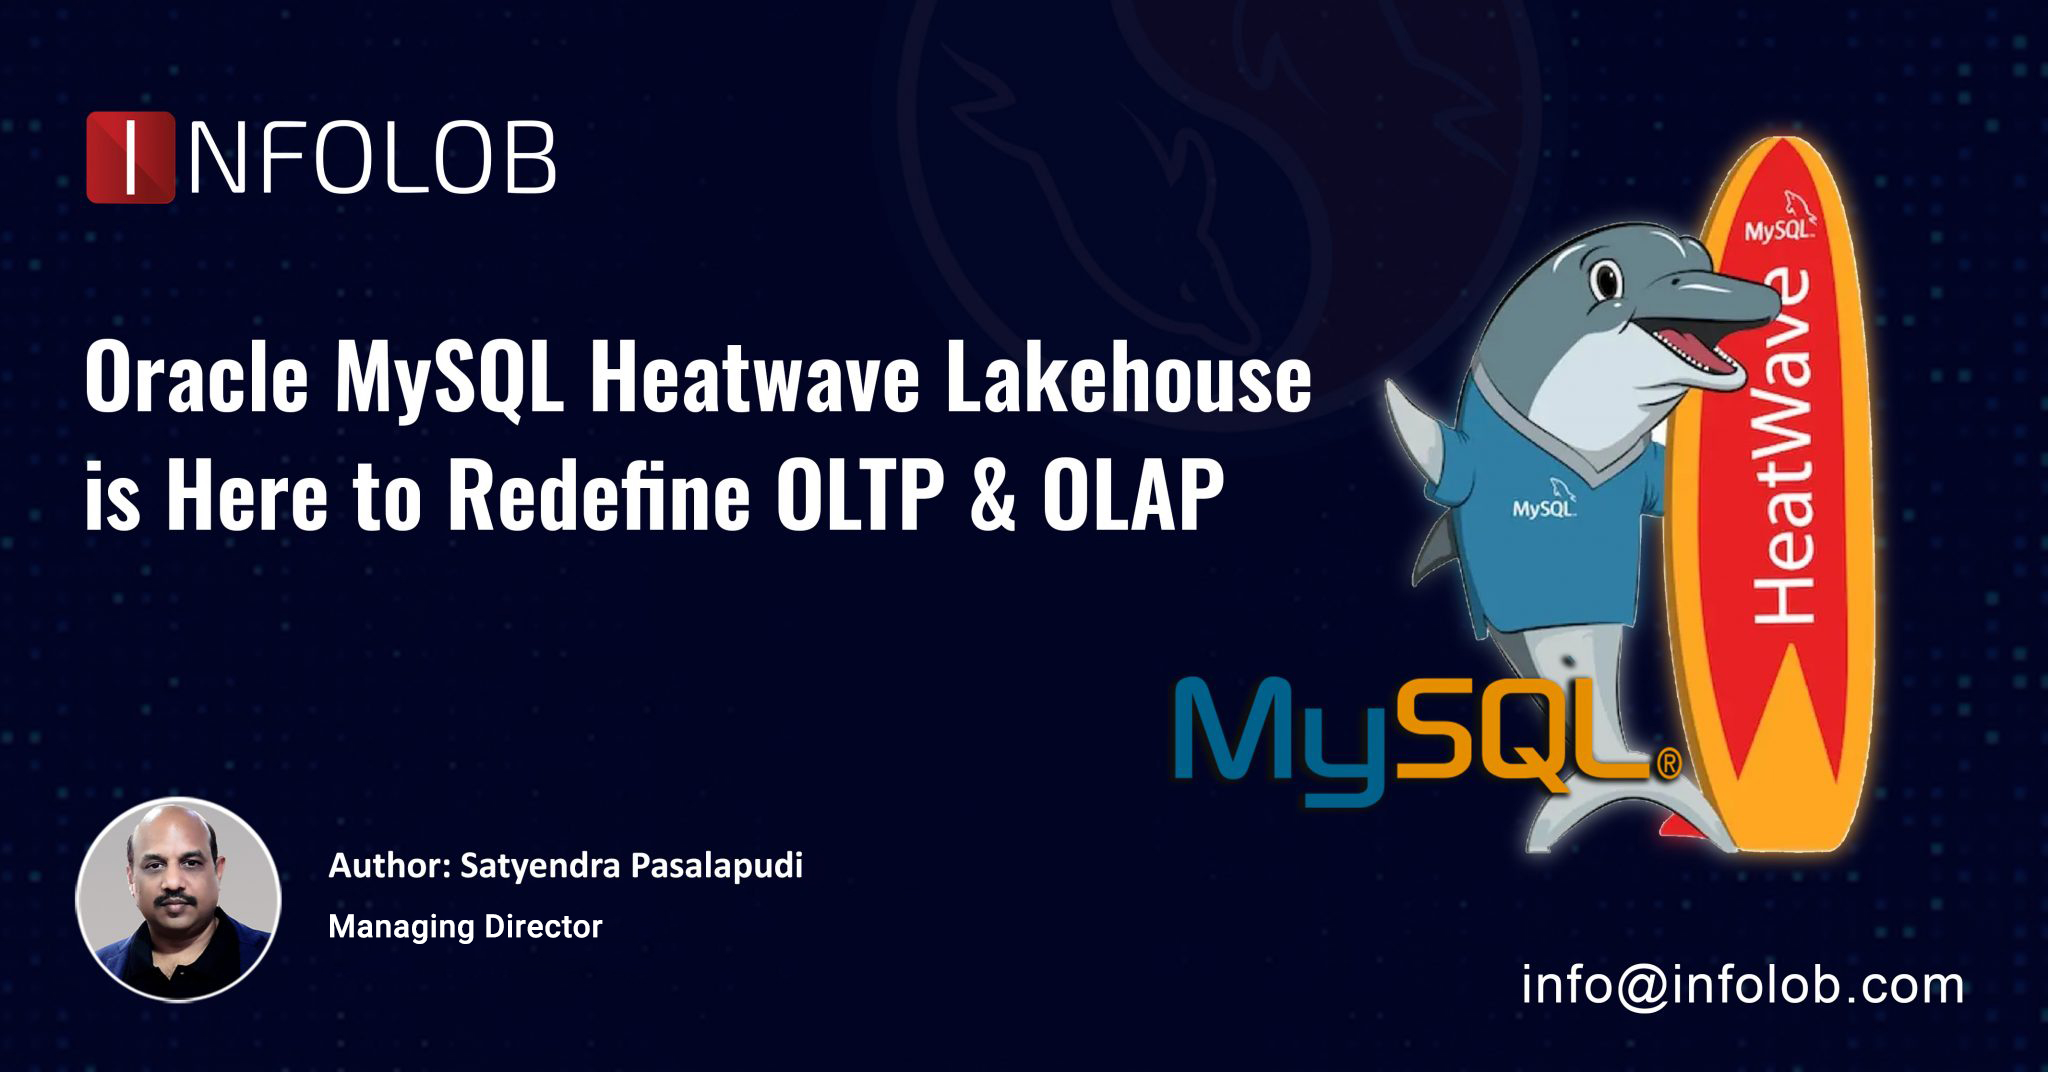 You are currently viewing 5 Ways The New MySQL HeatWave Lakehouse Transforms OLTP & OLAP